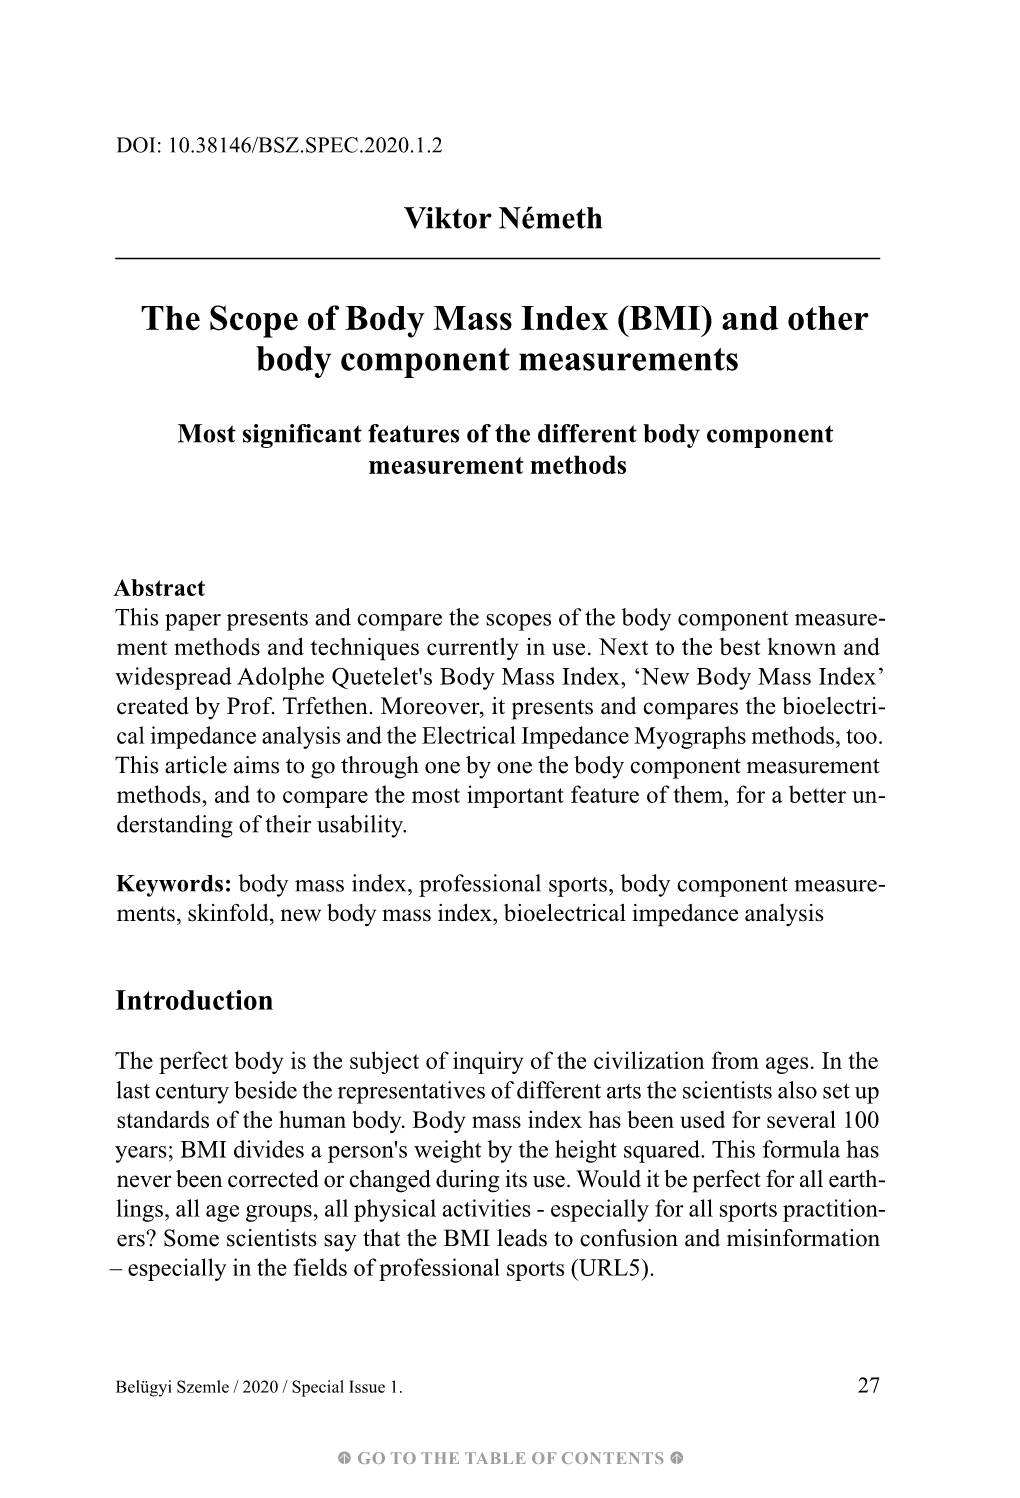 The Scope of Body Mass Index (BMI) and Other Body Component Measurements